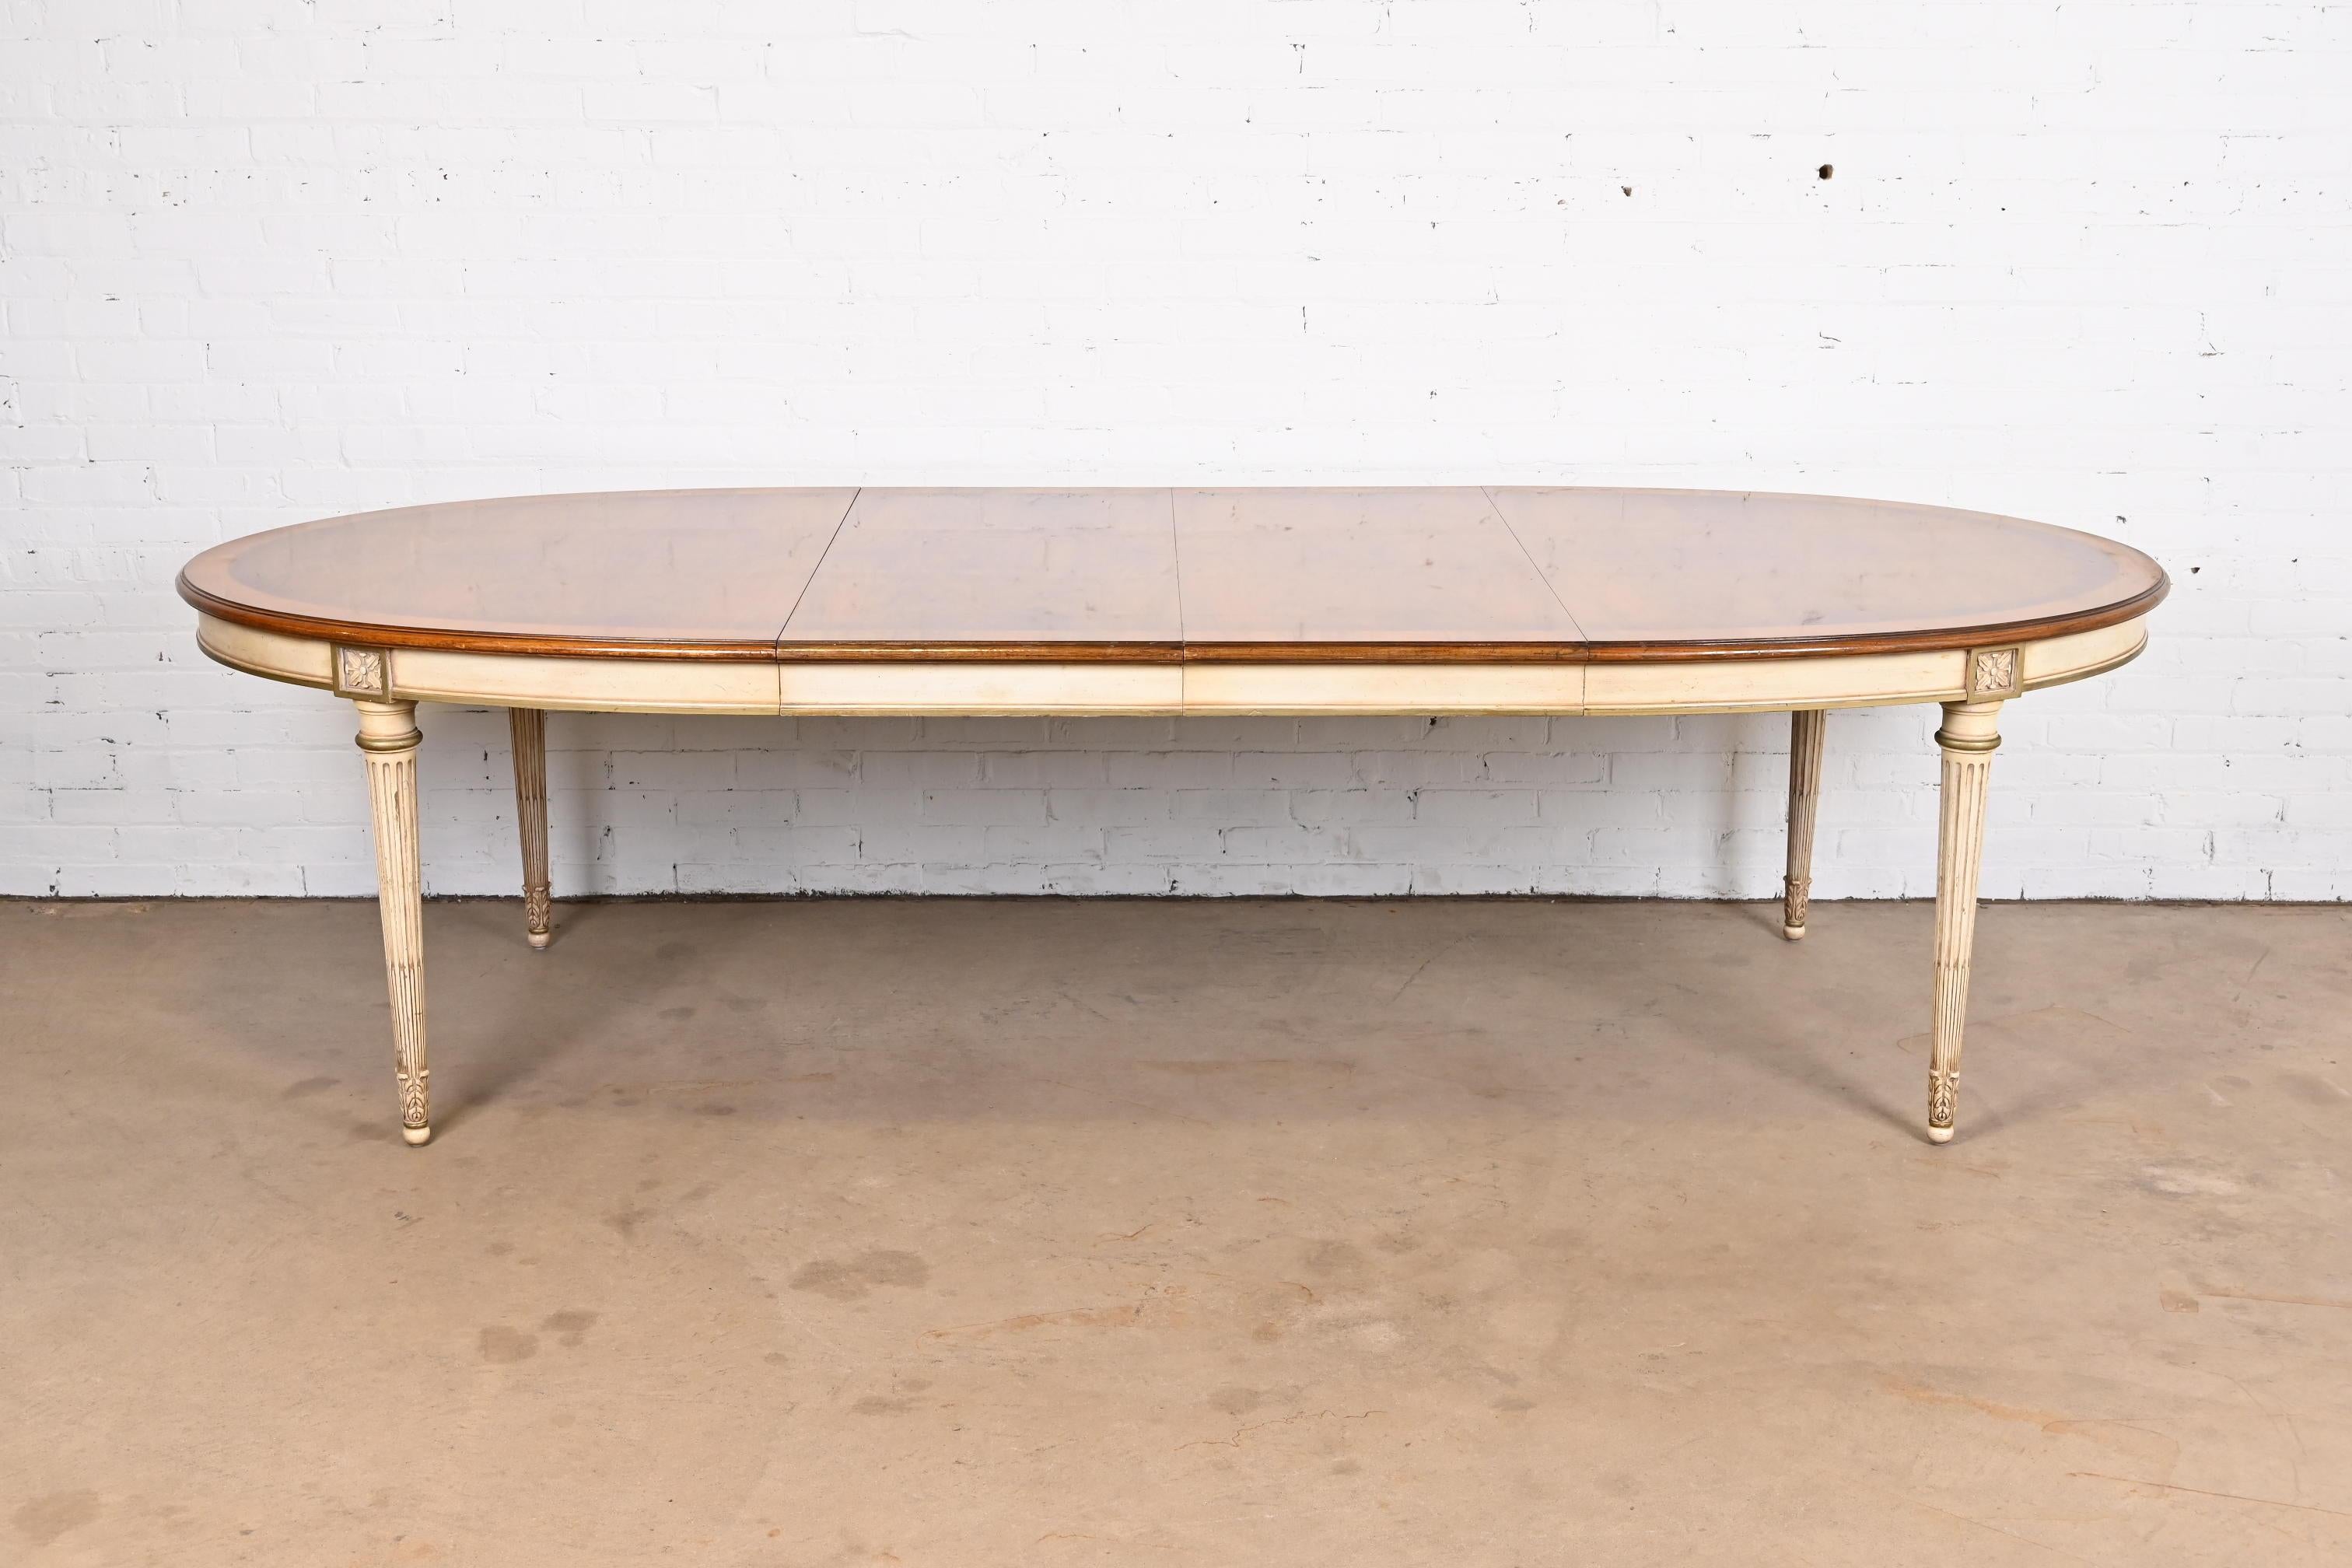 An exceptional French Regency Louis XVI style extension dining table

By Karges Furniture

USA, Circa 1960s

Gorgeous book-matched burled walnut, with cream and gold painted apron and legs.

Measures: 72